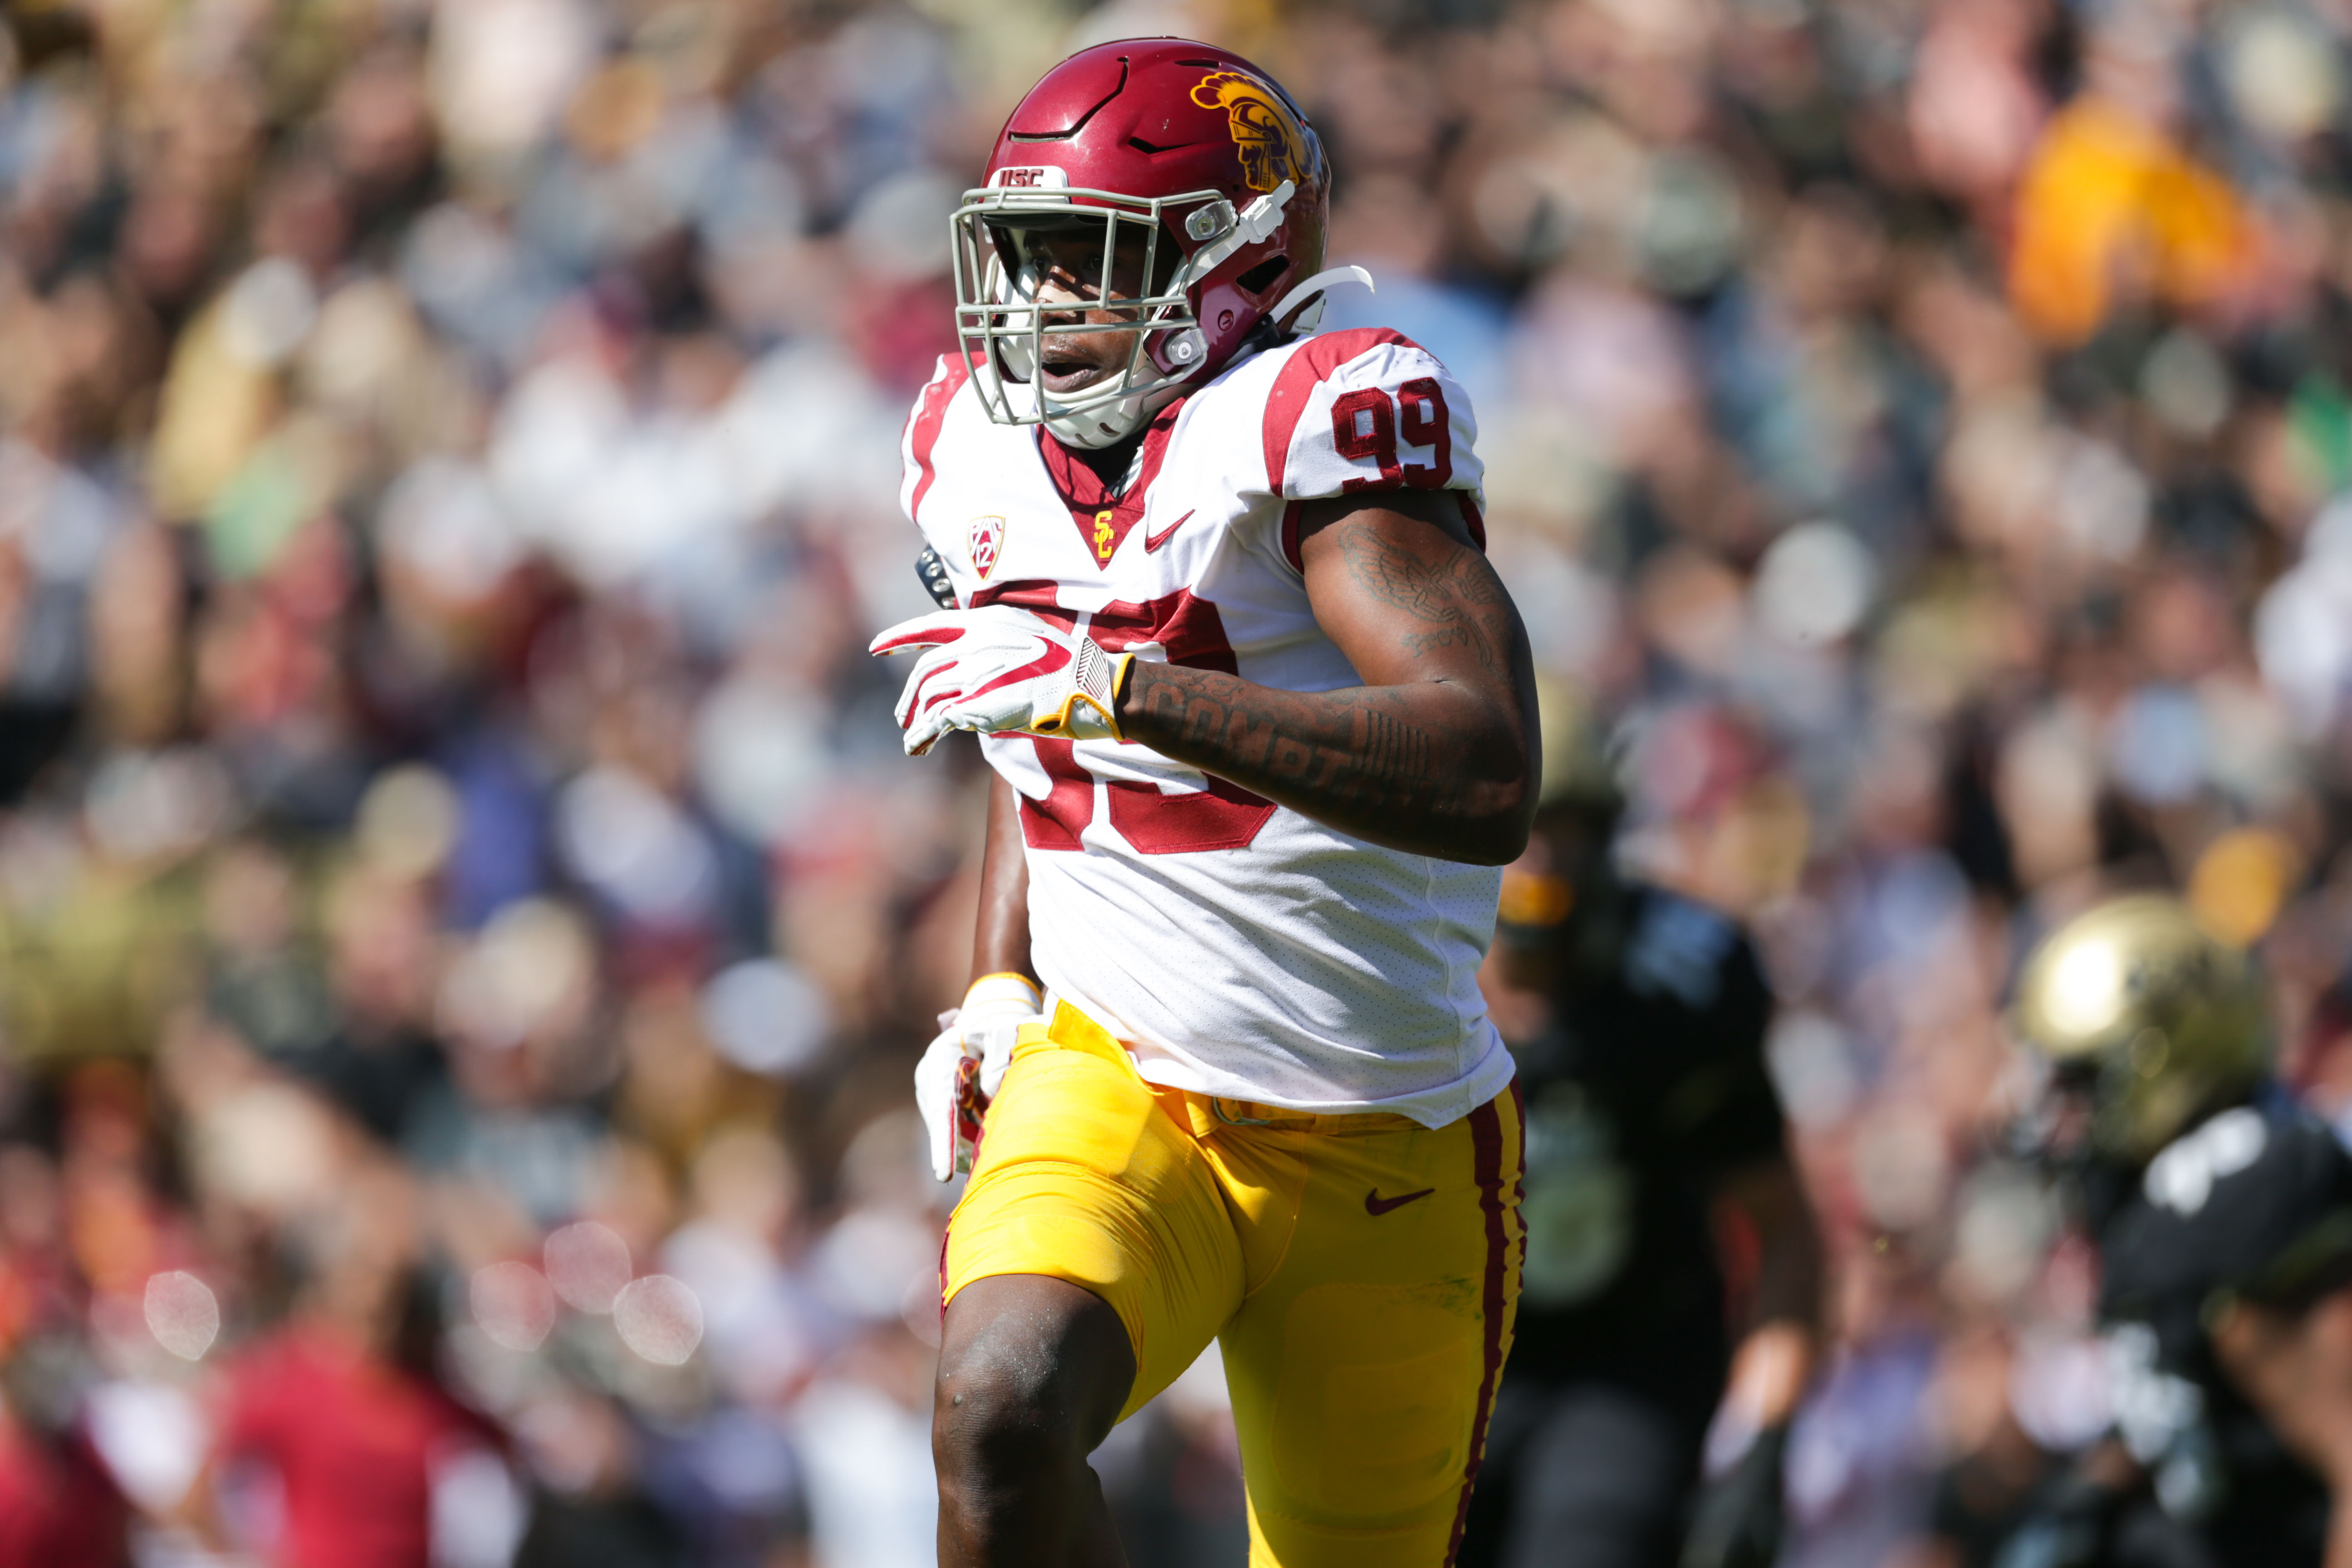 USC 2022 NFL Draft Scouting Reports include Chris Steele and Drake